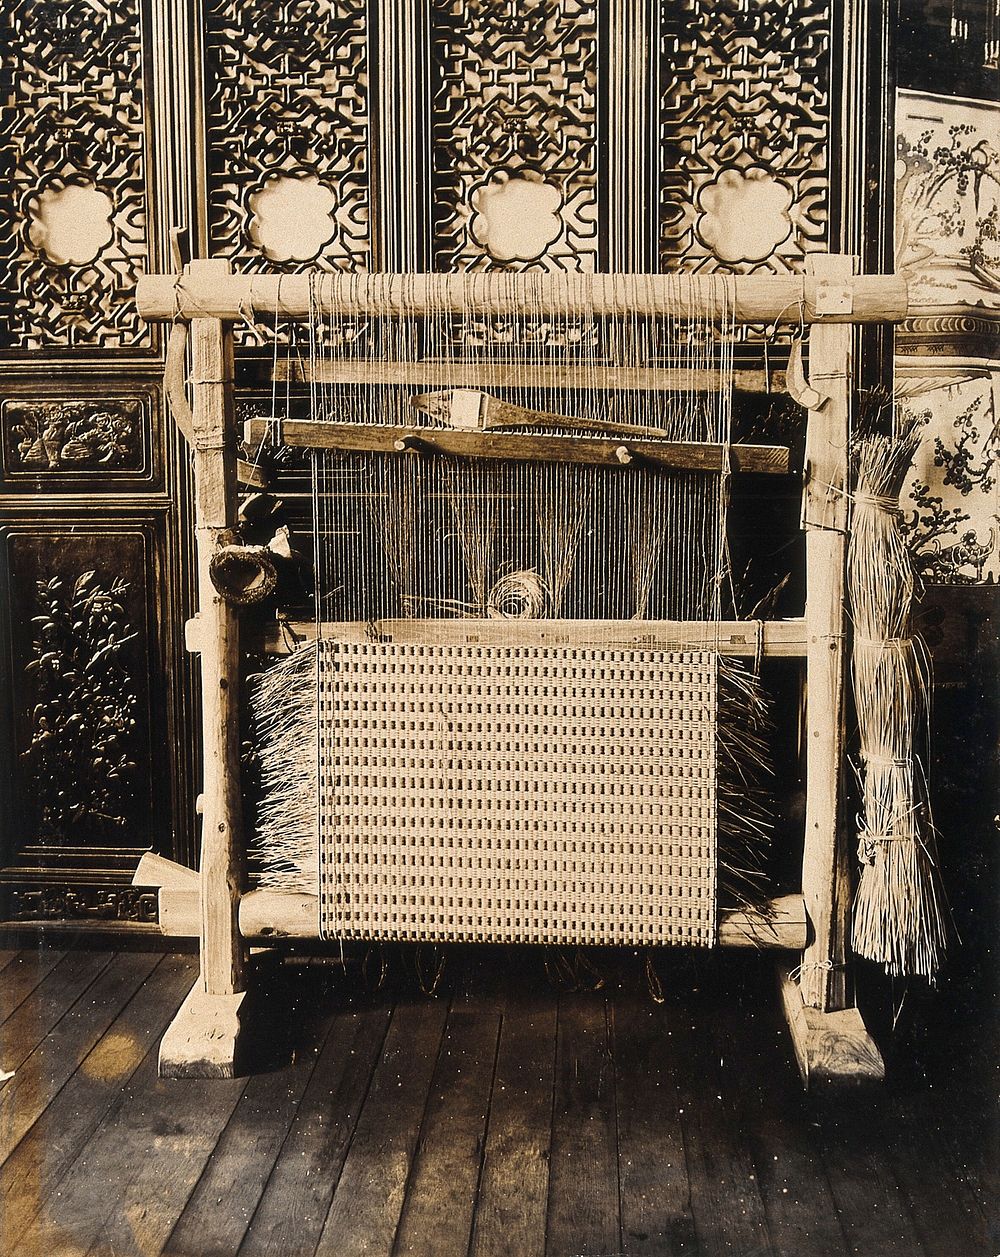 The 1904 World's Fair, St. Louis, Missouri: a Chinese loom for wicker-work weaving. Photograph, 1904.